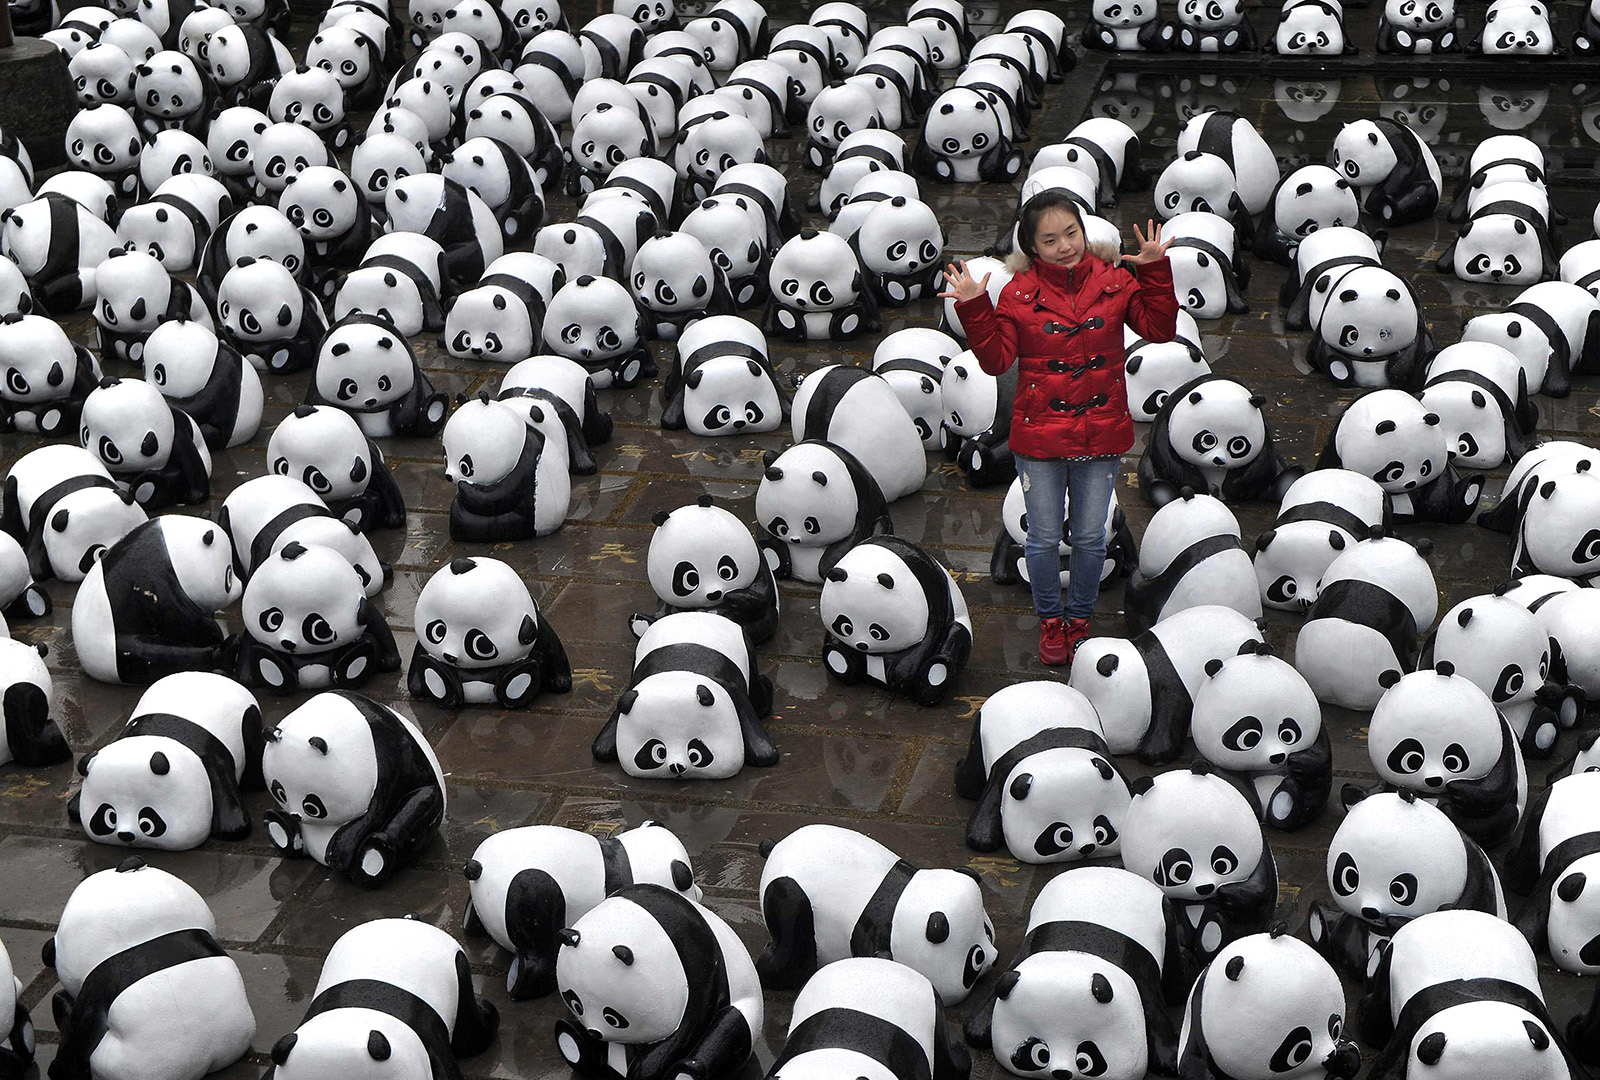 A woman poses for pictures among panda installations during an exhibition in Hefei, China.